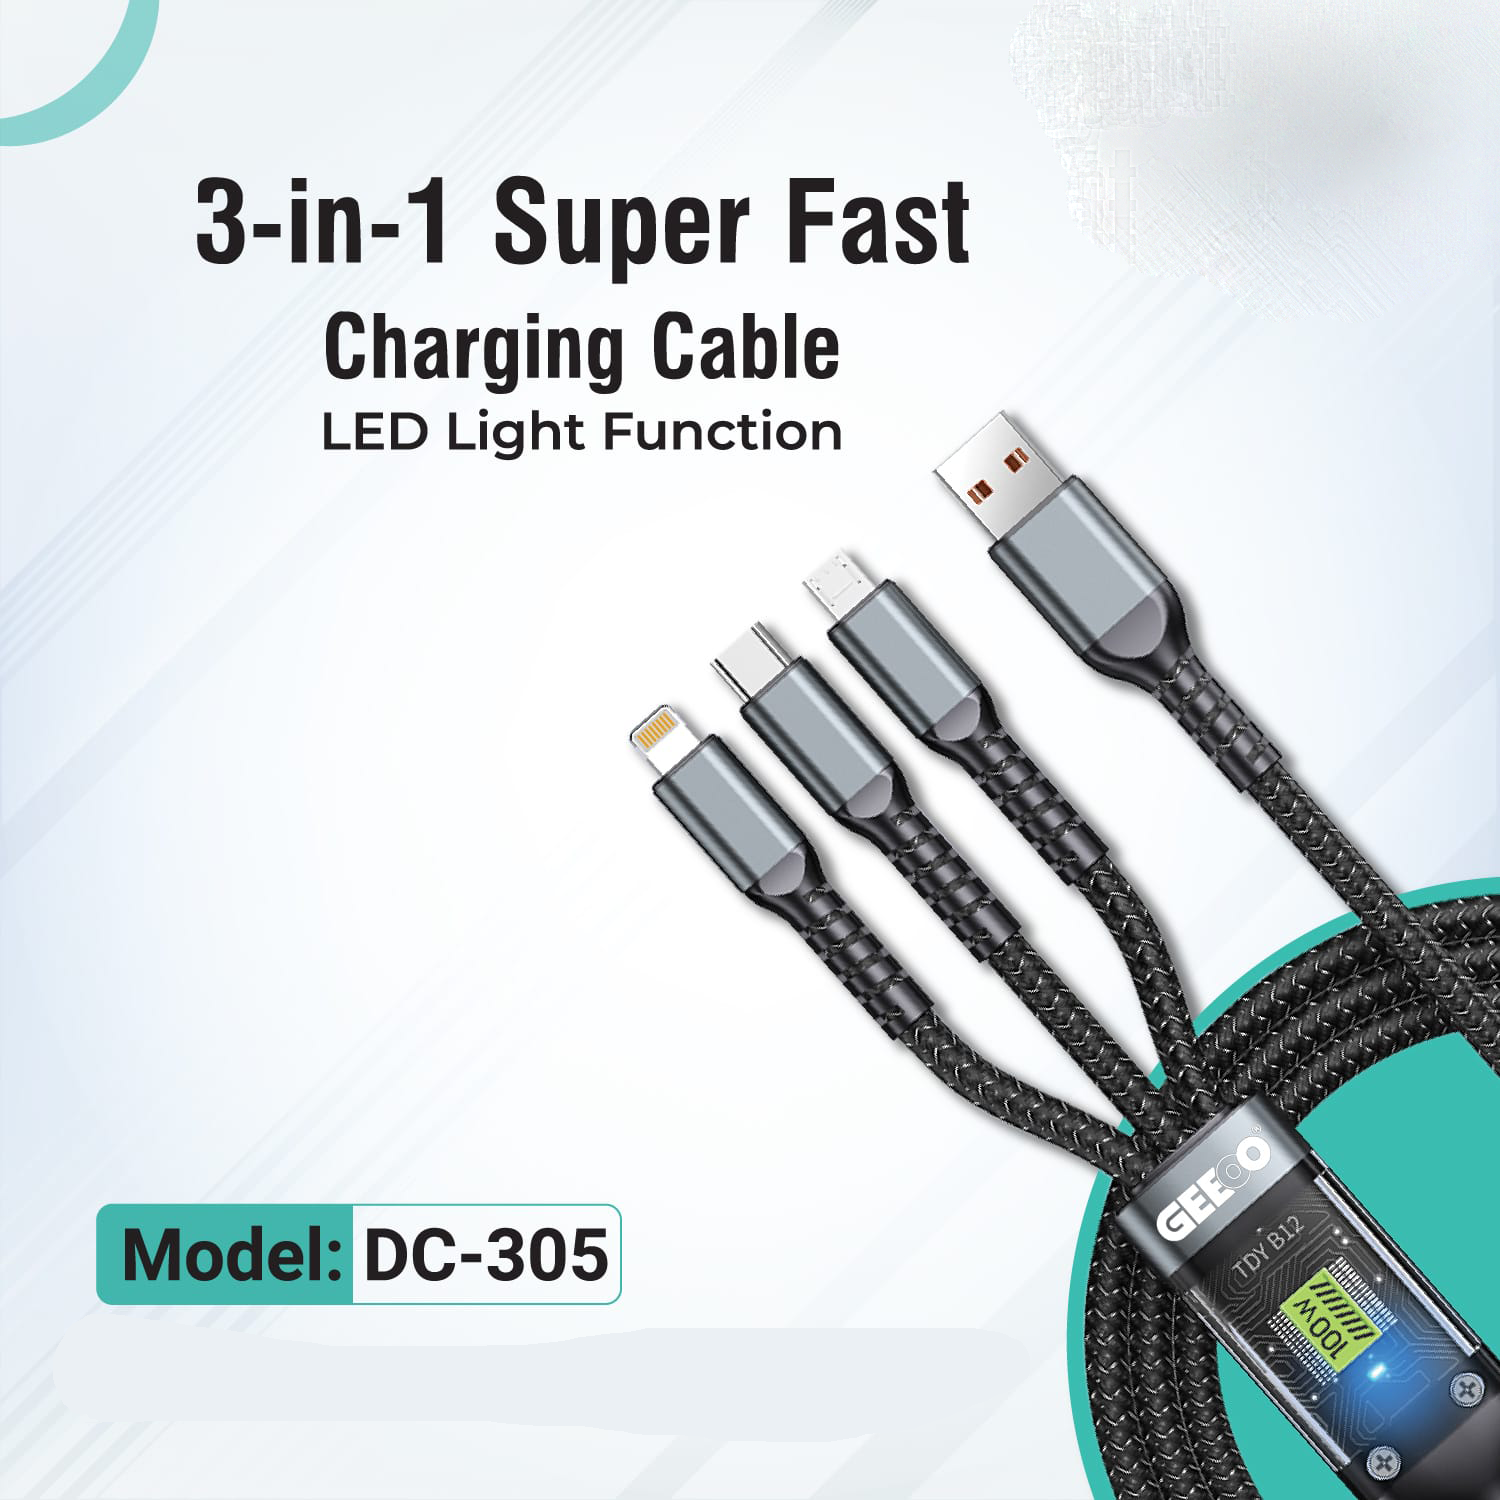 3 IN 1 Super Fast Charging Cable